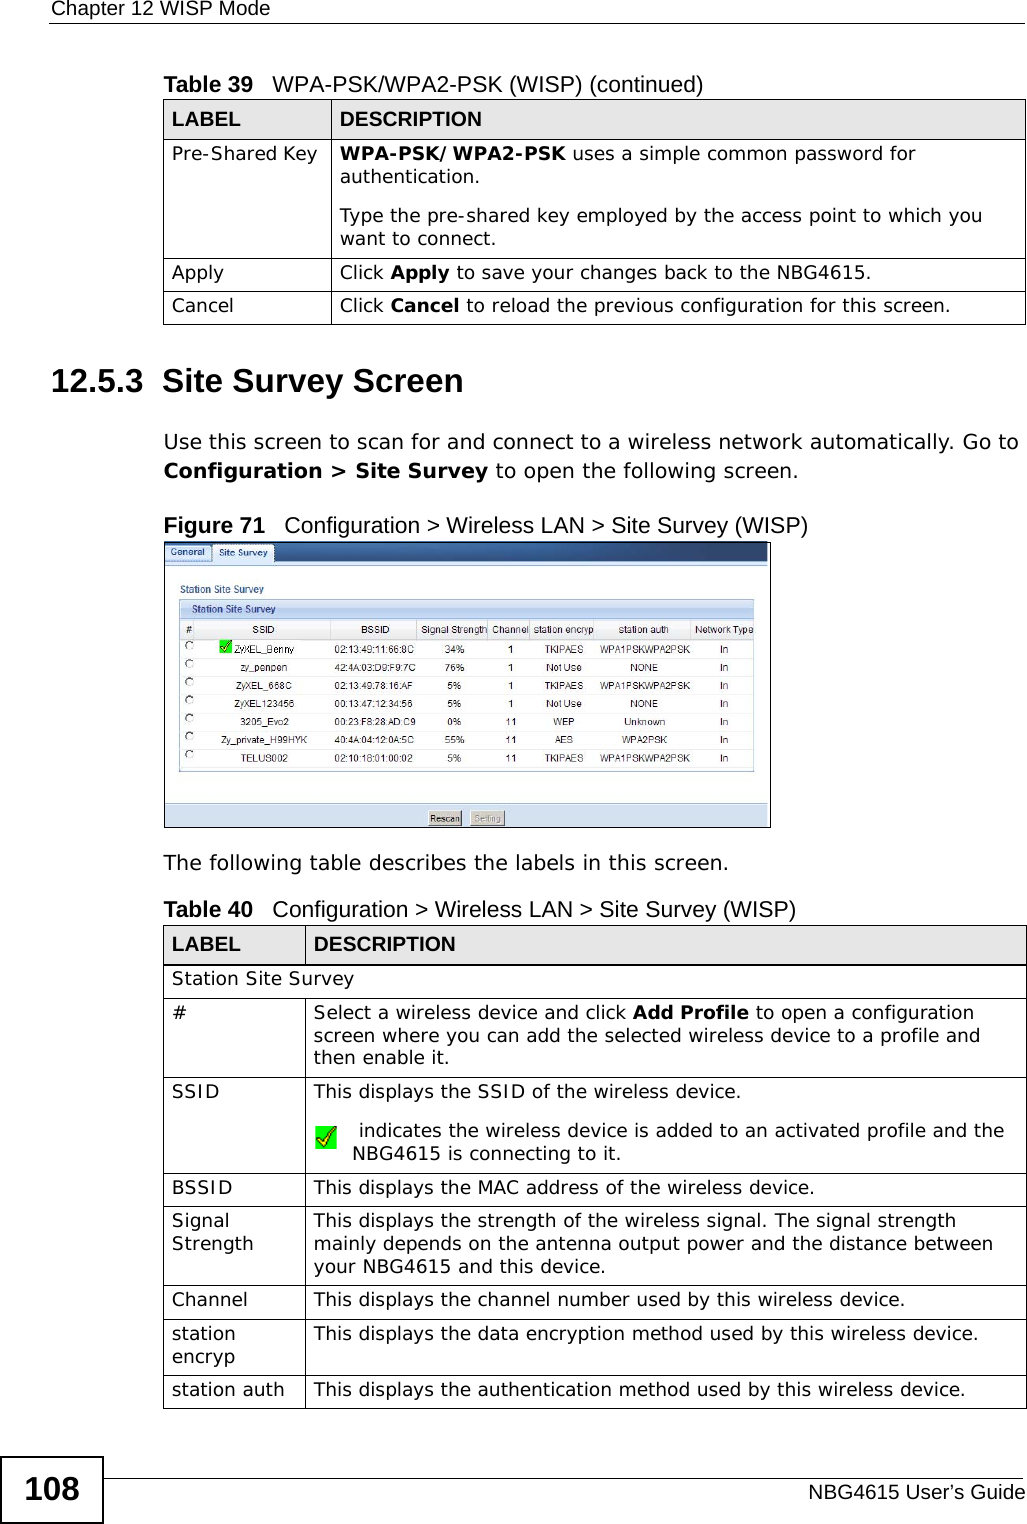 Chapter 12 WISP ModeNBG4615 User’s Guide10812.5.3  Site Survey ScreenUse this screen to scan for and connect to a wireless network automatically. Go to Configuration &gt; Site Survey to open the following screen.Figure 71   Configuration &gt; Wireless LAN &gt; Site Survey (WISP)The following table describes the labels in this screen. Pre-Shared Key  WPA-PSK/WPA2-PSK uses a simple common password for authentication.Type the pre-shared key employed by the access point to which you want to connect. Apply Click Apply to save your changes back to the NBG4615.Cancel Click Cancel to reload the previous configuration for this screen.Table 39   WPA-PSK/WPA2-PSK (WISP) (continued)LABEL DESCRIPTIONTable 40   Configuration &gt; Wireless LAN &gt; Site Survey (WISP)LABEL  DESCRIPTIONStation Site Survey# Select a wireless device and click Add Profile to open a configuration screen where you can add the selected wireless device to a profile and then enable it.SSID This displays the SSID of the wireless device. indicates the wireless device is added to an activated profile and the NBG4615 is connecting to it.BSSID This displays the MAC address of the wireless device.Signal Strength This displays the strength of the wireless signal. The signal strength mainly depends on the antenna output power and the distance between your NBG4615 and this device.Channel This displays the channel number used by this wireless device. station encryp This displays the data encryption method used by this wireless device.station auth This displays the authentication method used by this wireless device.